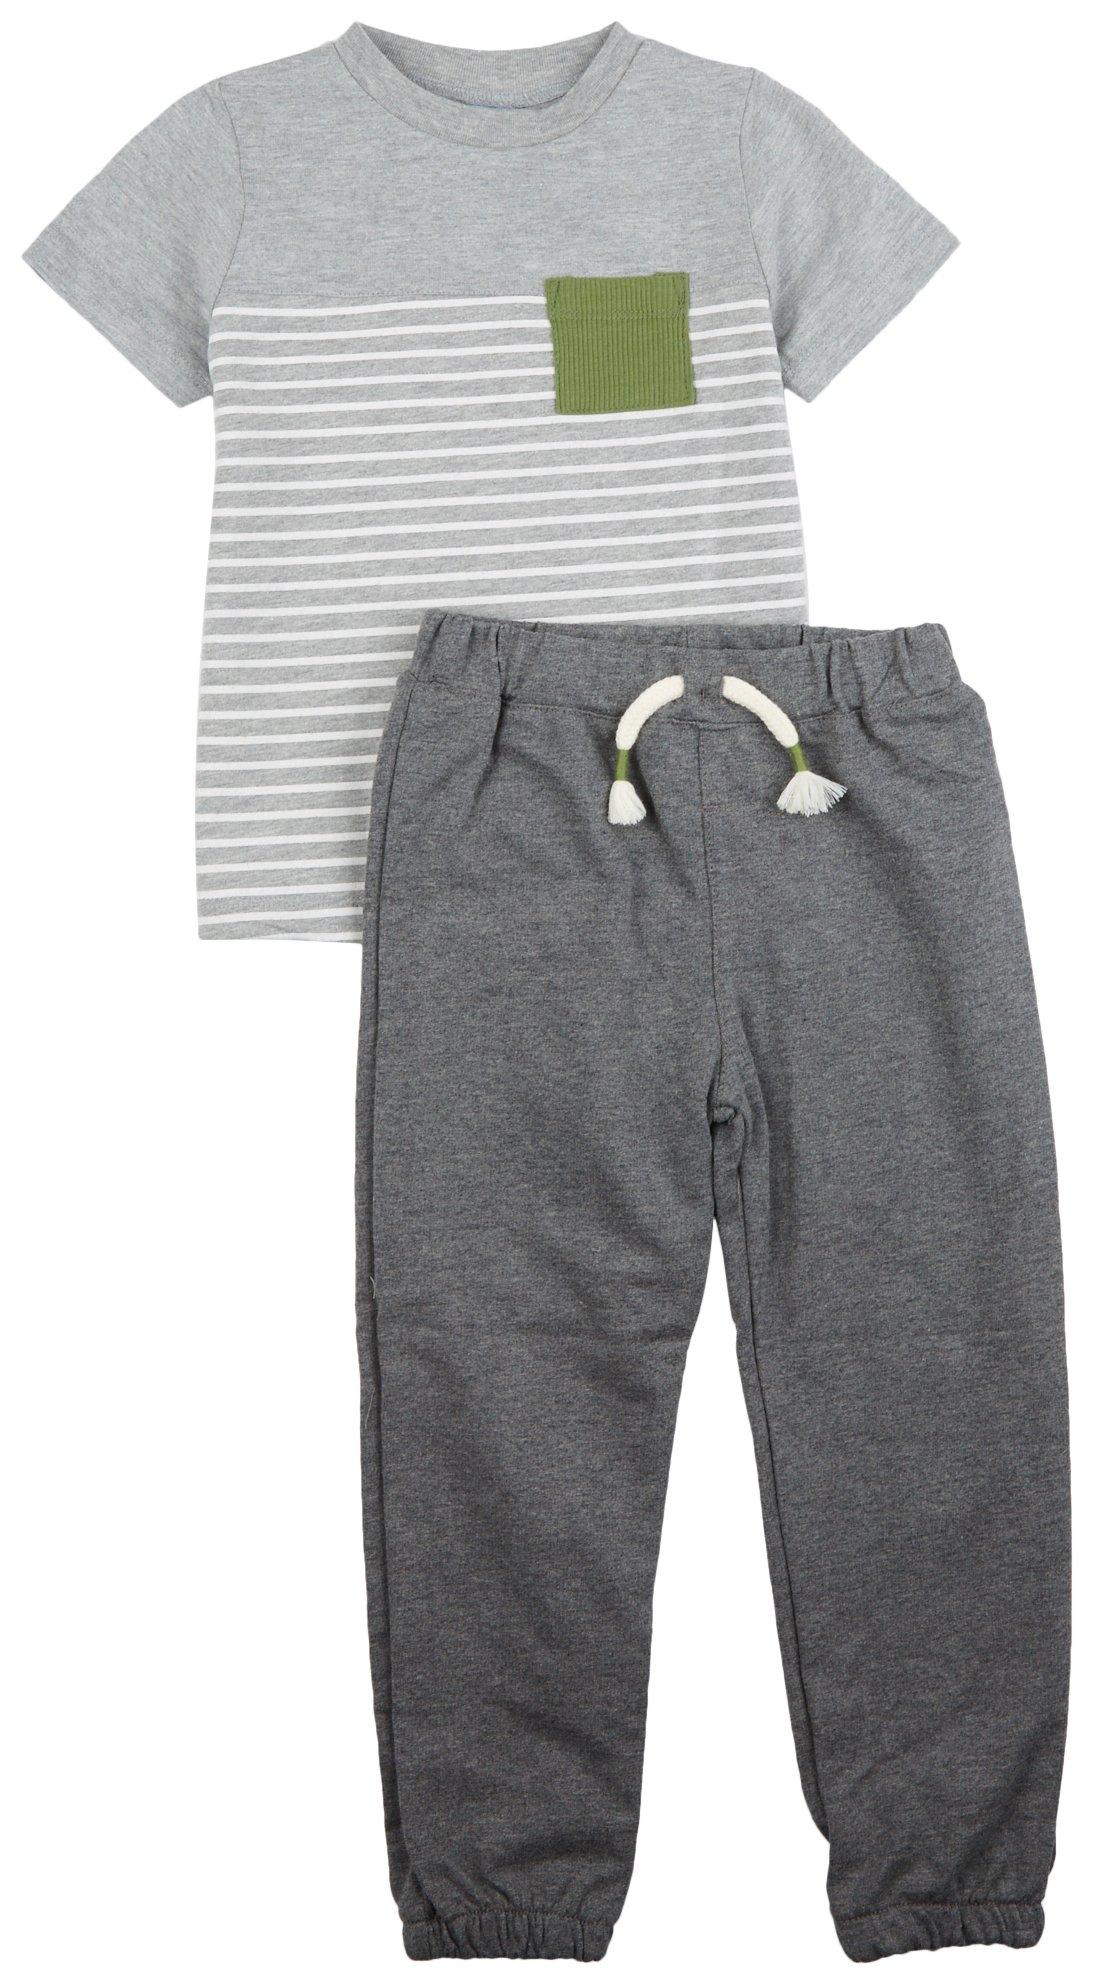 Little Lad Toddler Boys 2-Pc. Stripe Top And Jogger Set